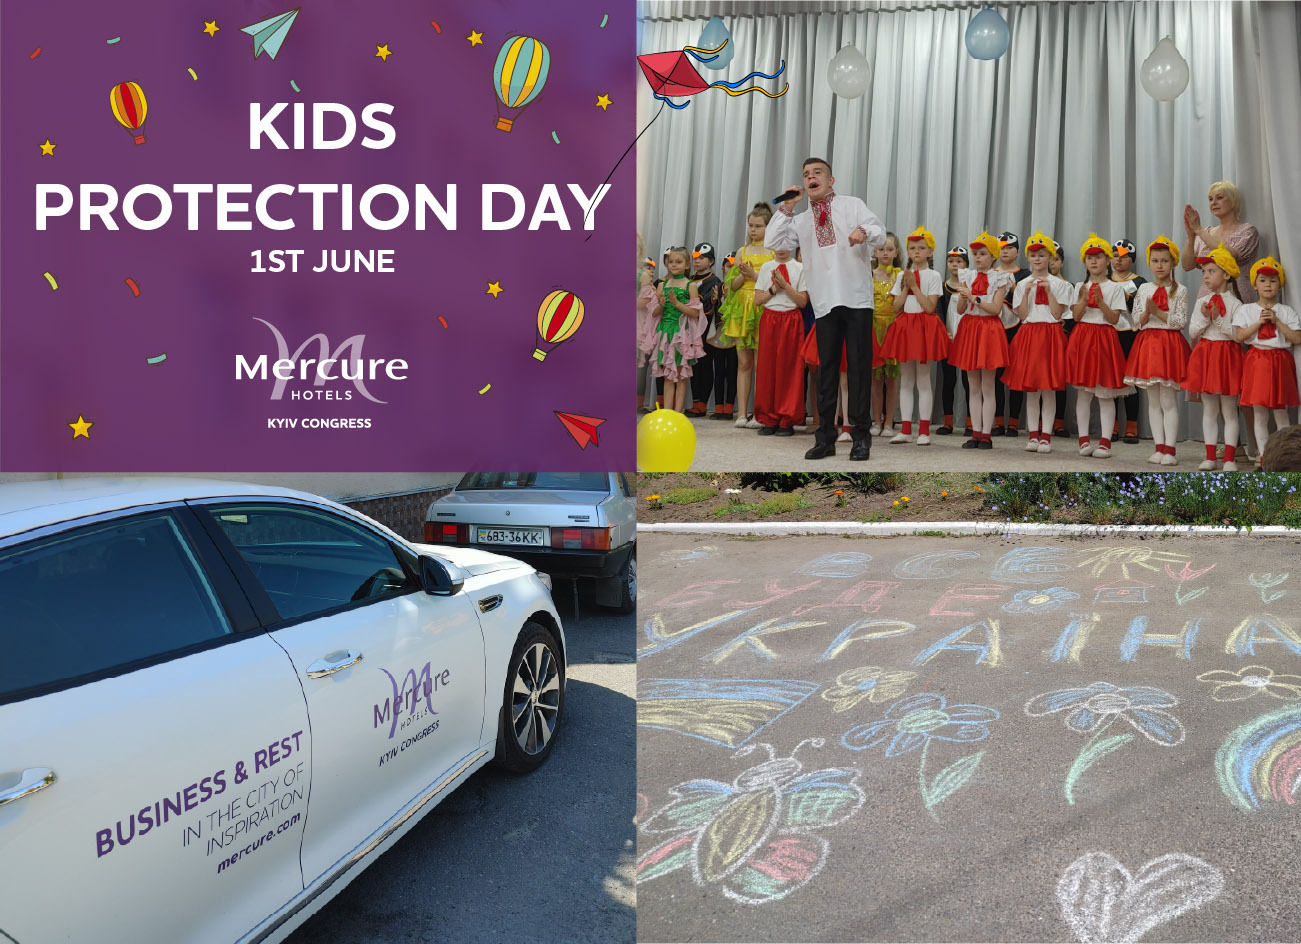 Today it's Kids' Protection Day!